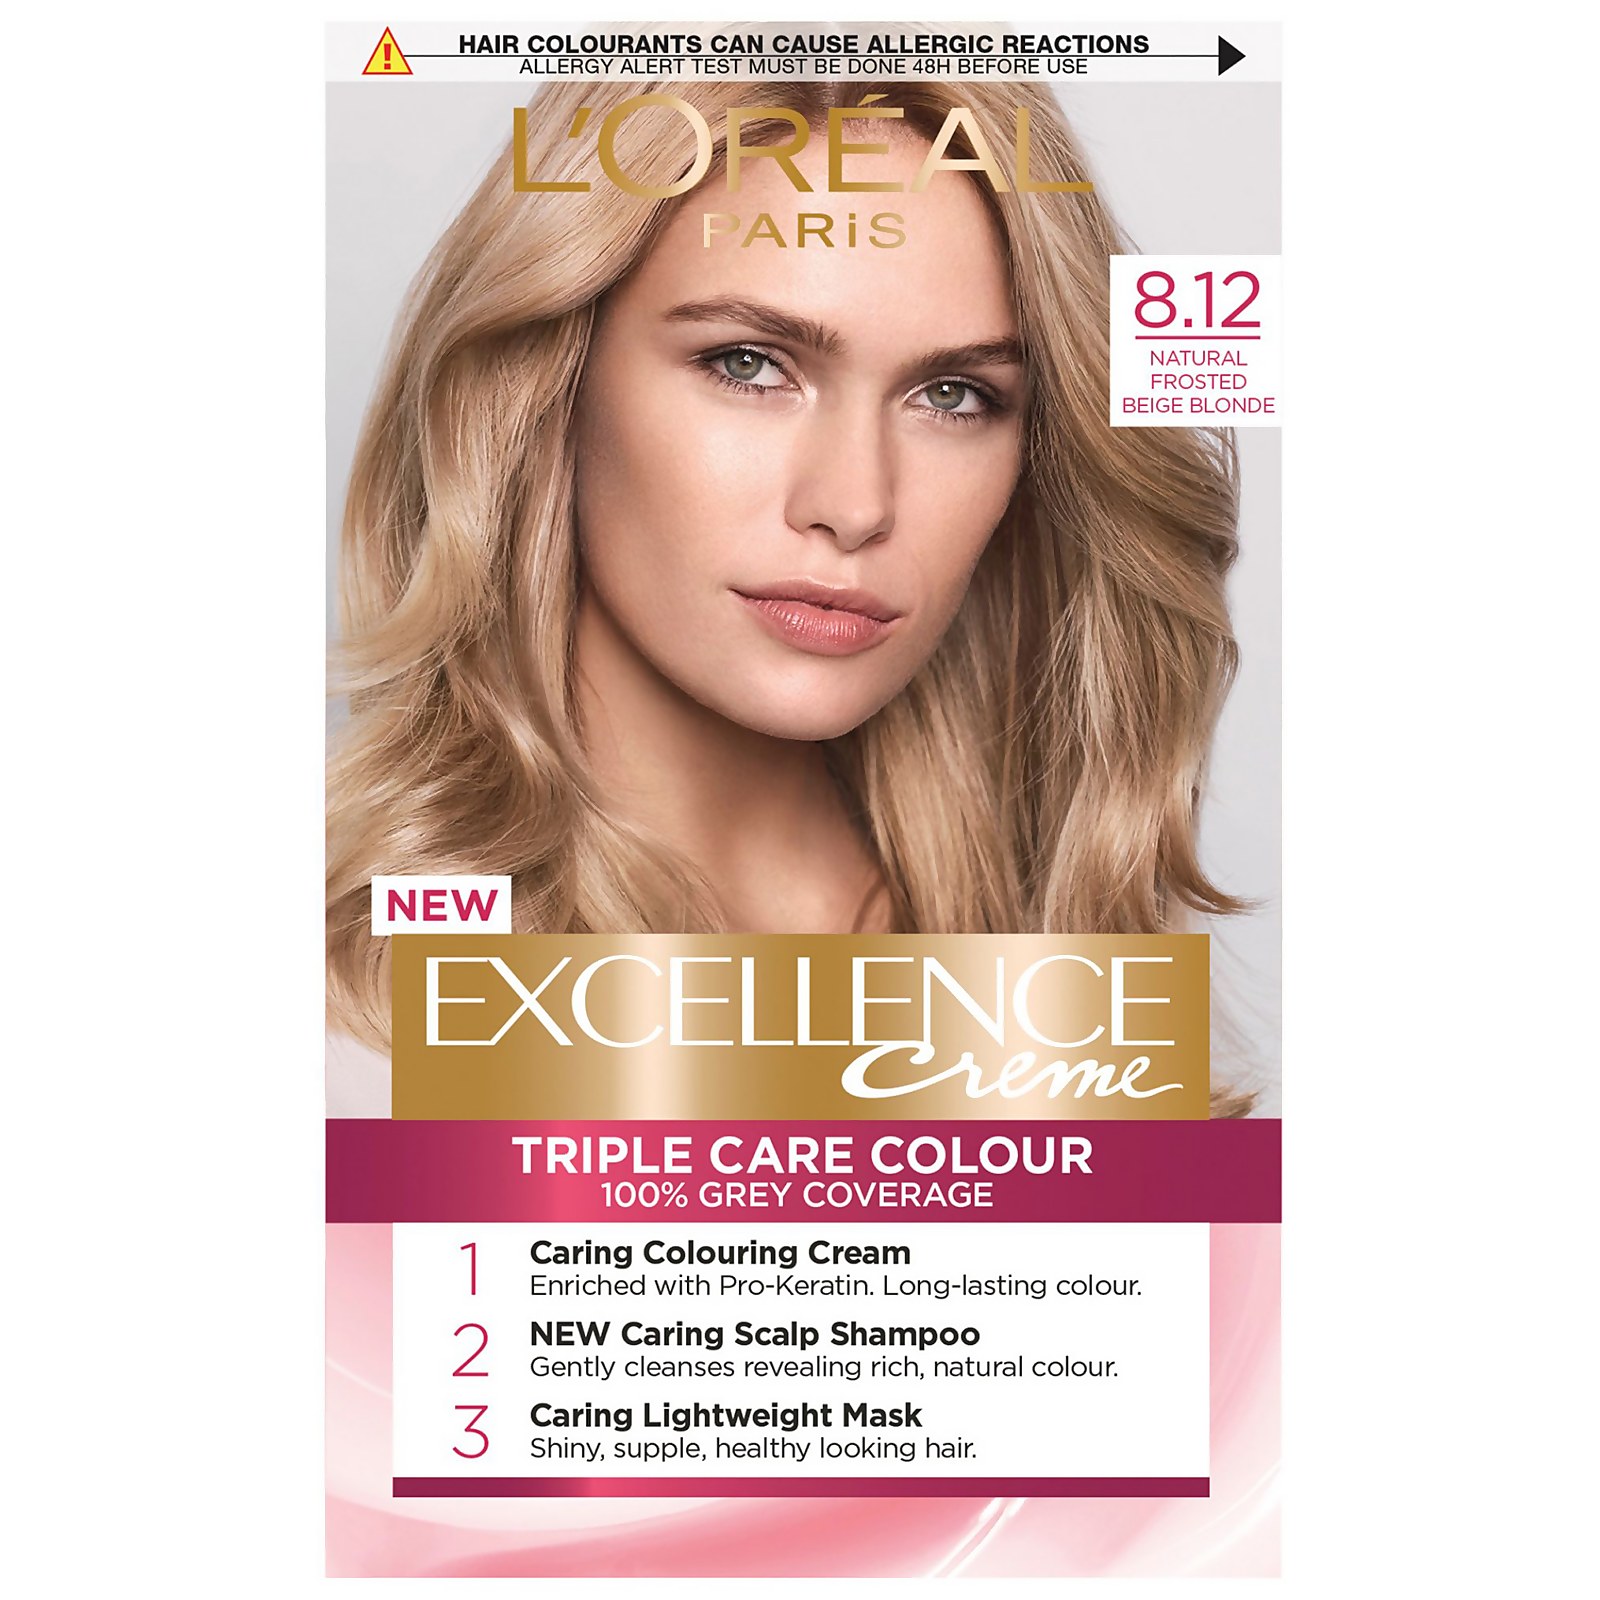 L'Oreal Paris Excellence Creme Permanent Hair Dye (Various Shades) - 8.12 Natural Frosted Beige Blon